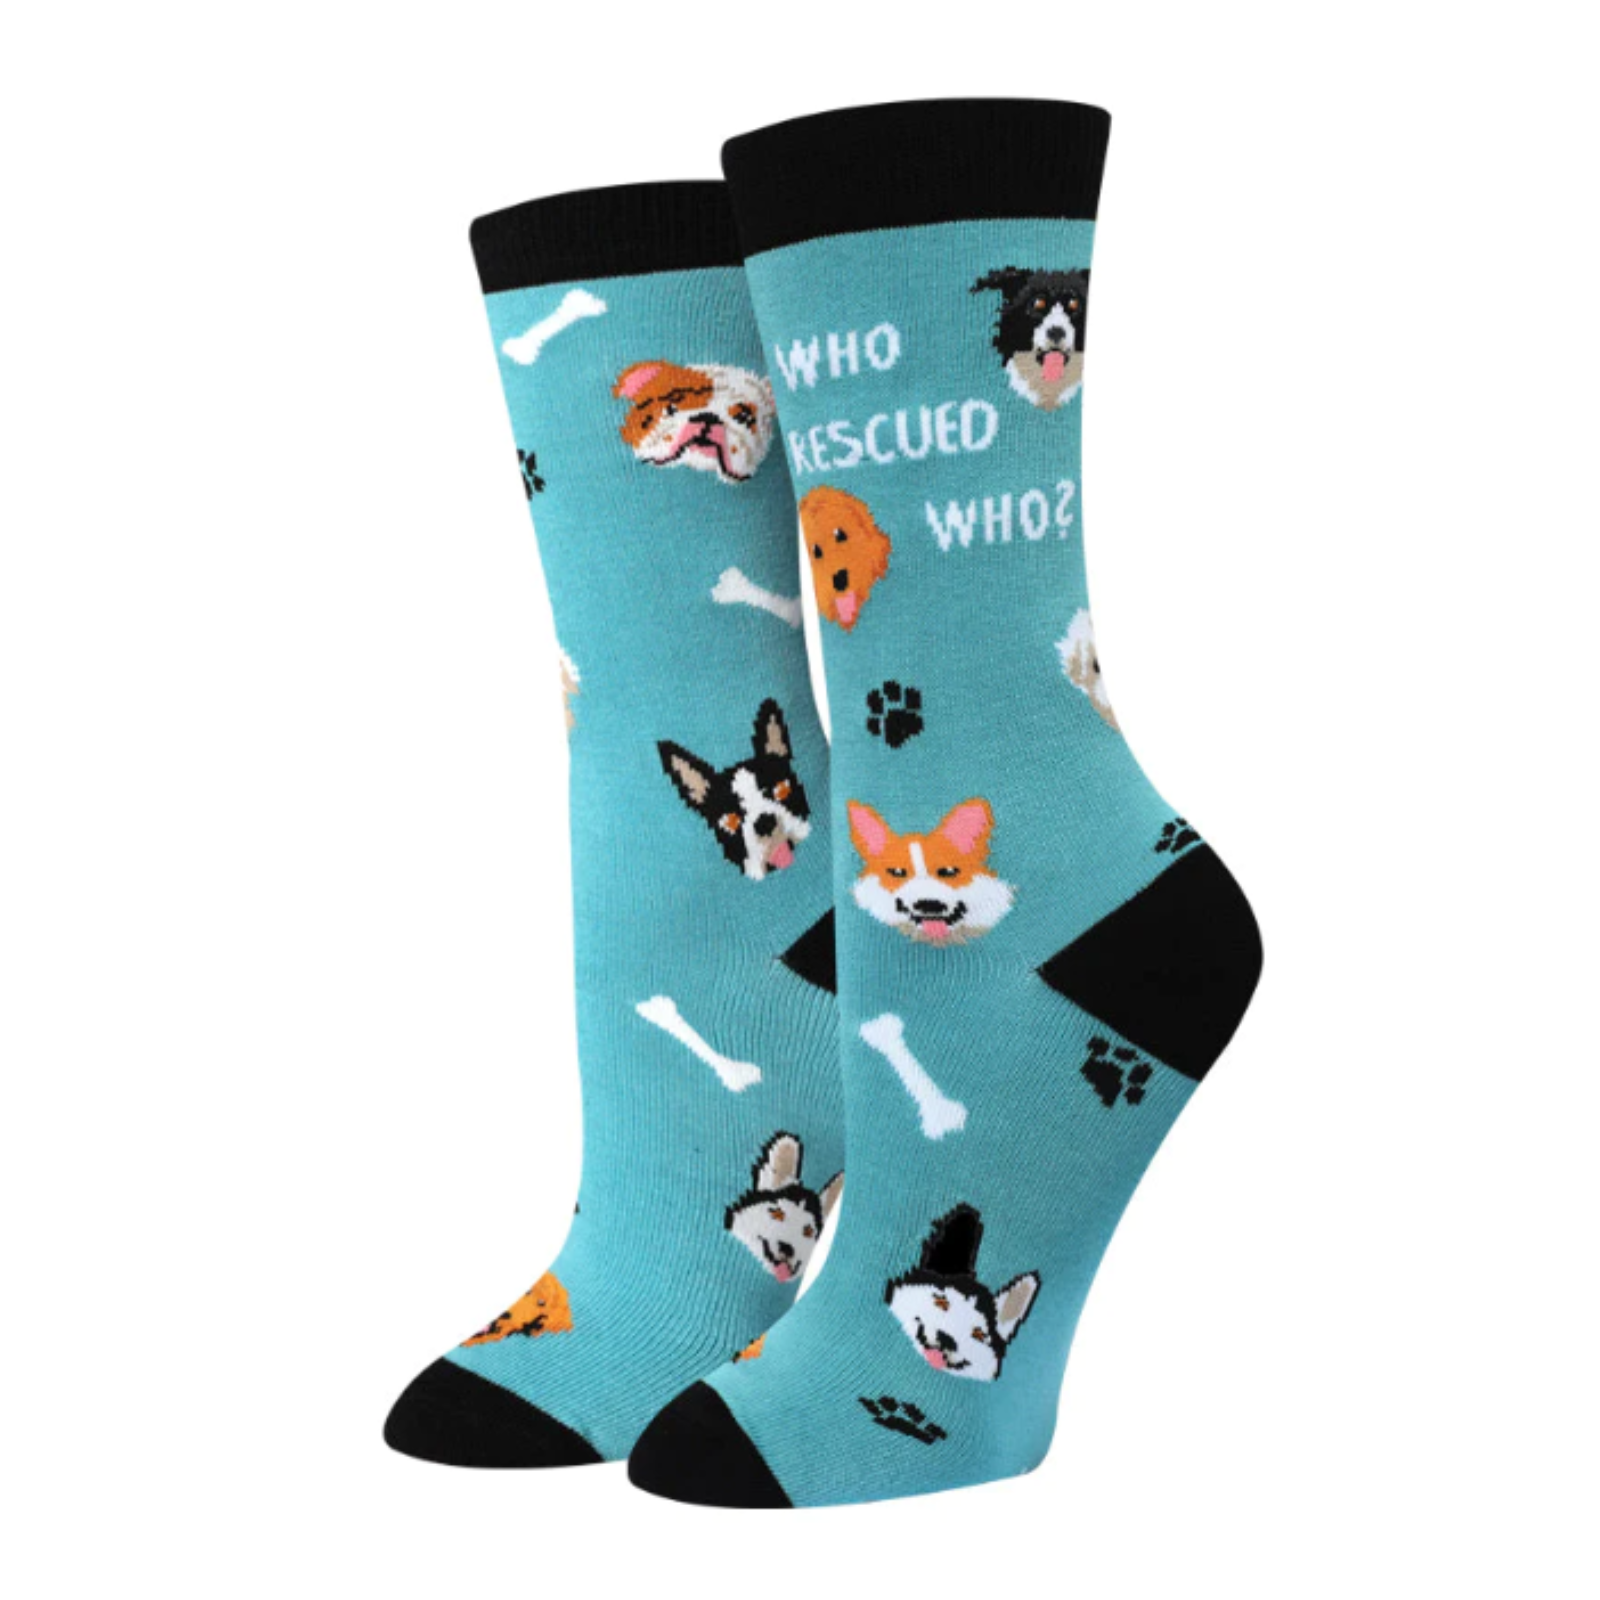 Sock Harbor women's blue crew sock with Who Rescued Who written on it and pictures of dog paws, bones, and dog faces